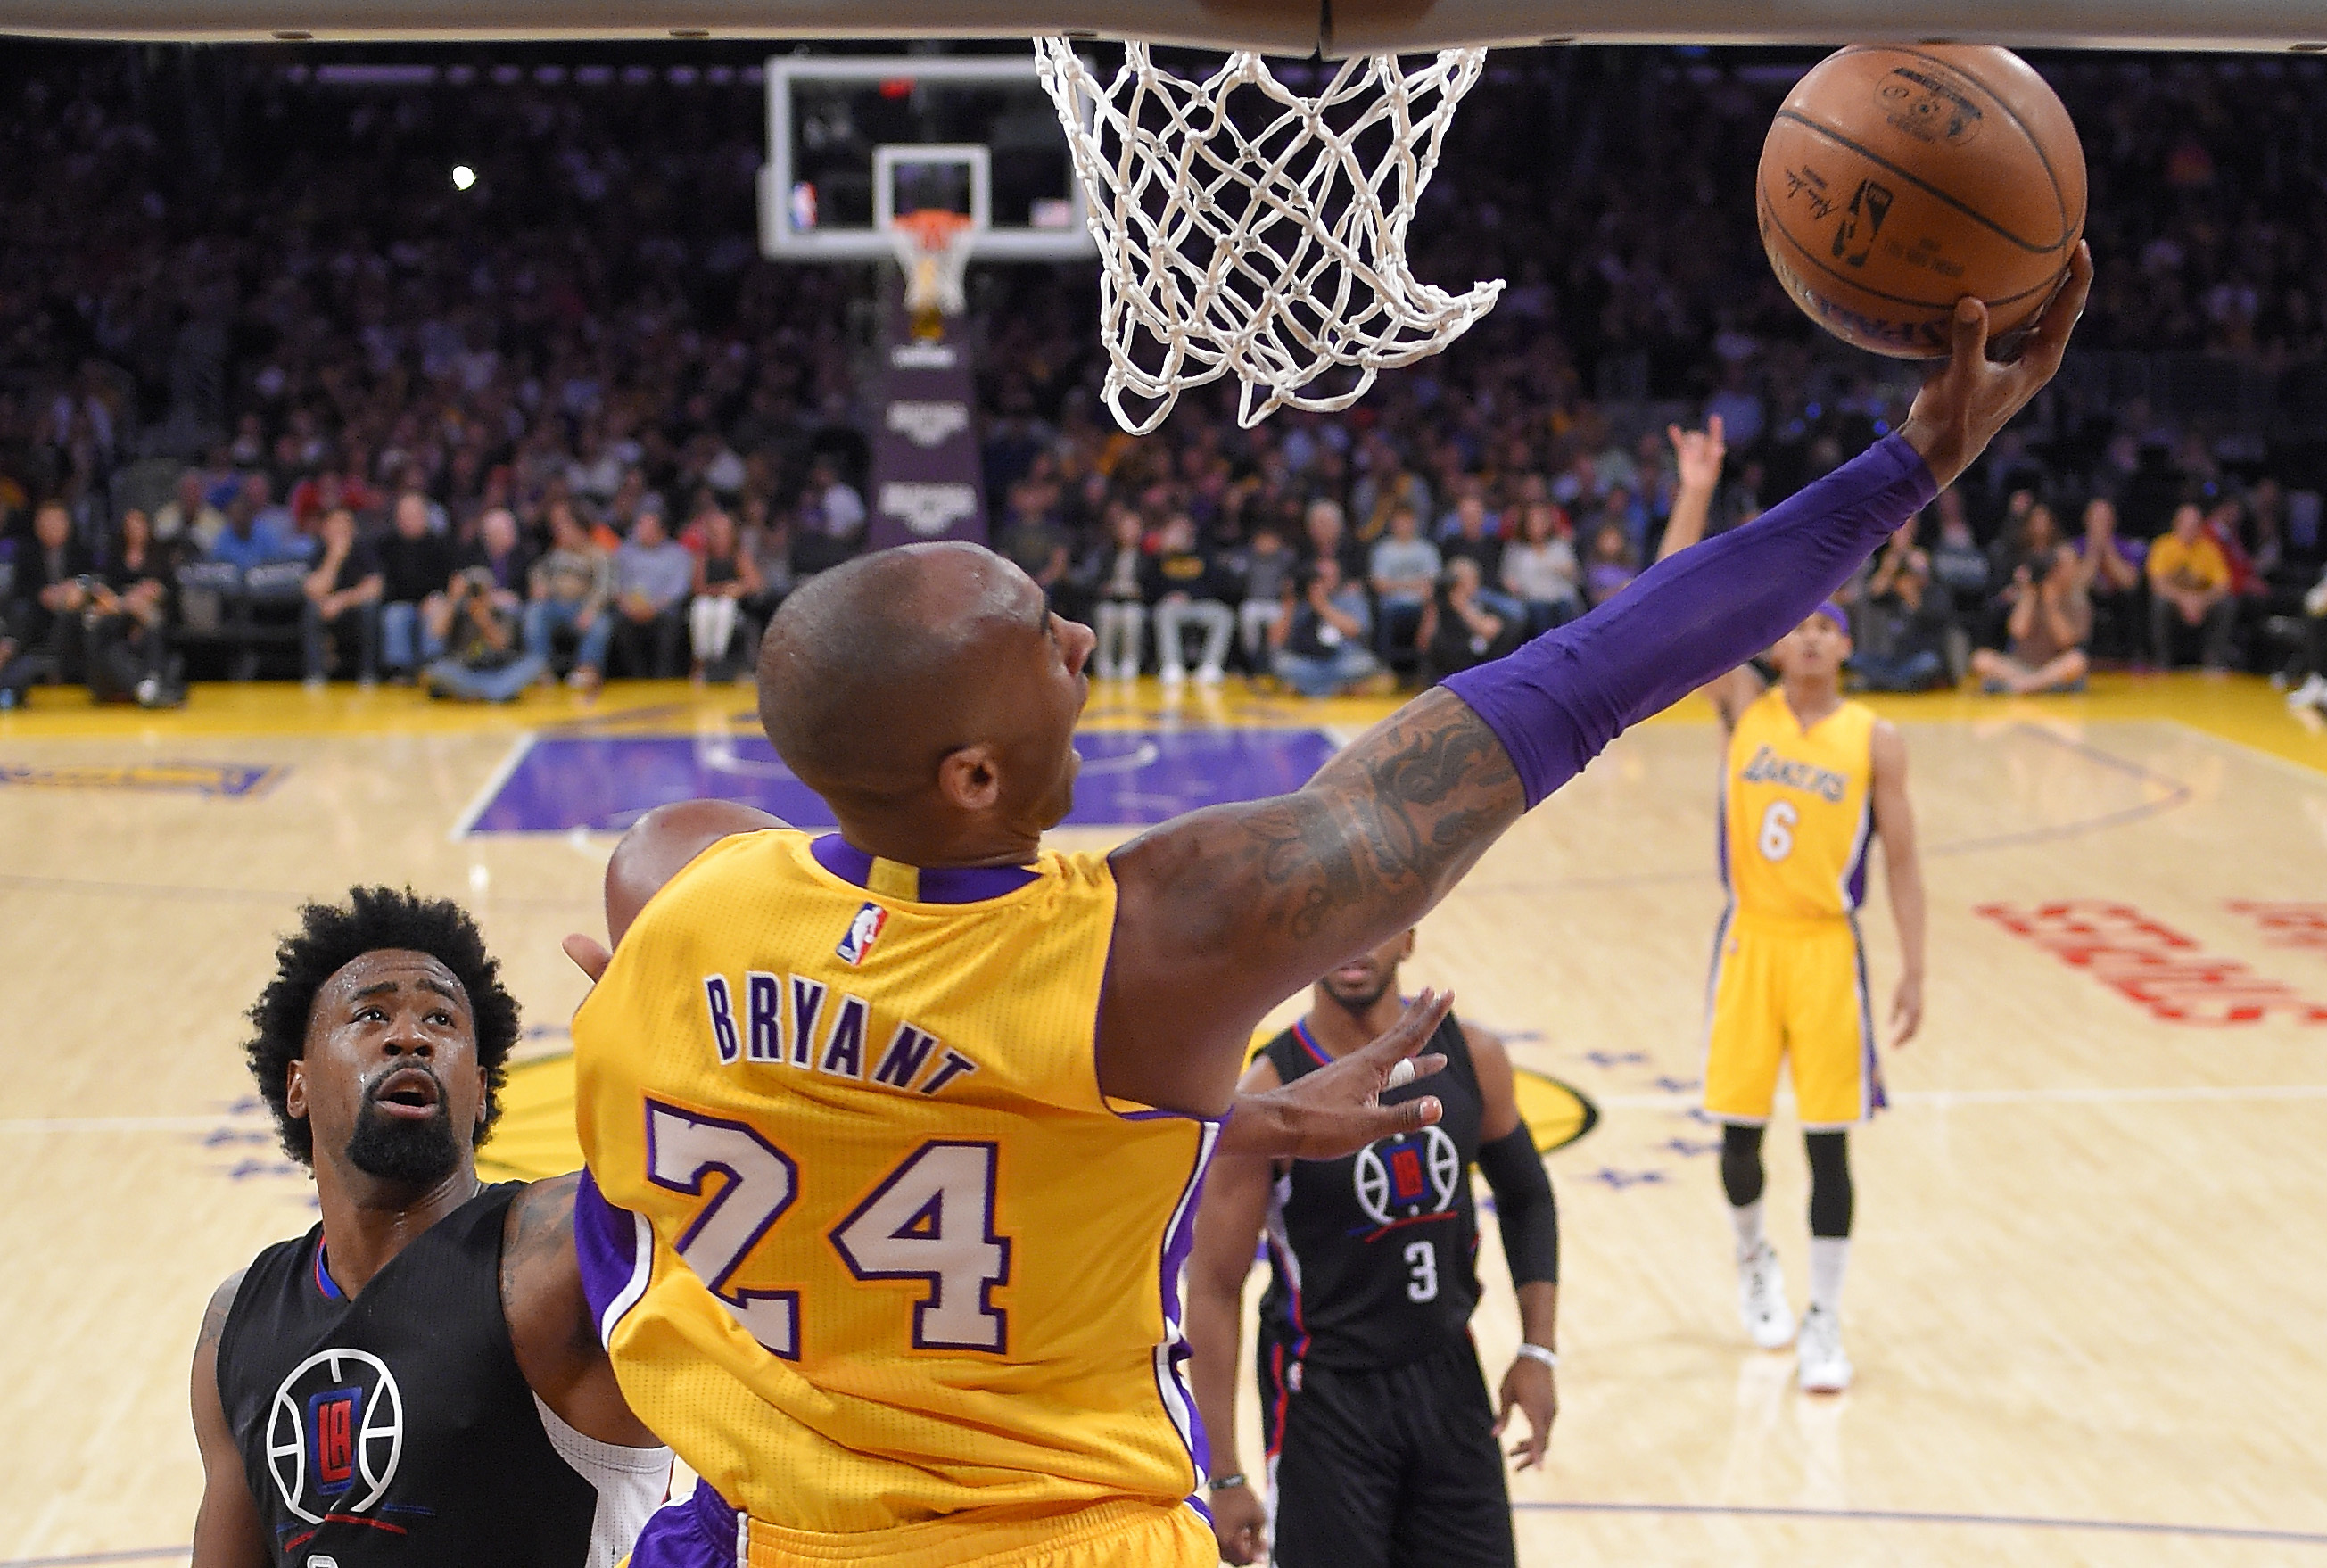 Los Angeles Lakers forward Kobe Bryant (24) shoots as Los Angeles Clippers center DeAndre Jordan defends during the first half of an NBA basketball game, Wednesday, April 6, 2016, in Los Angeles. AP